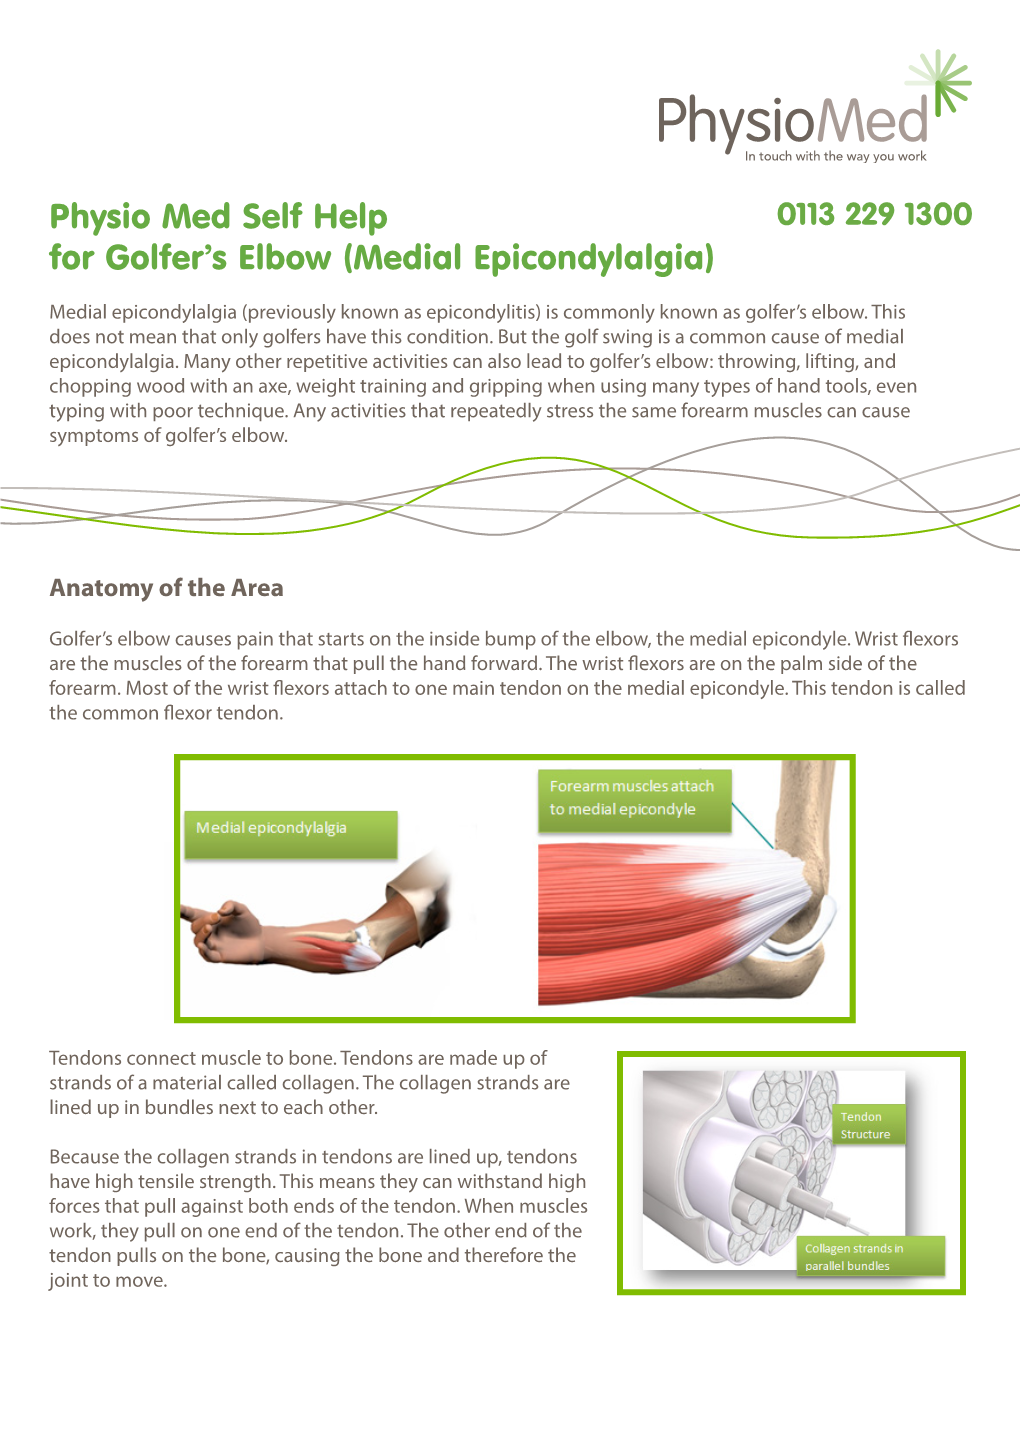 Physio Med Self Help for Golfer's Elbow (Medial Epicondylalgia)